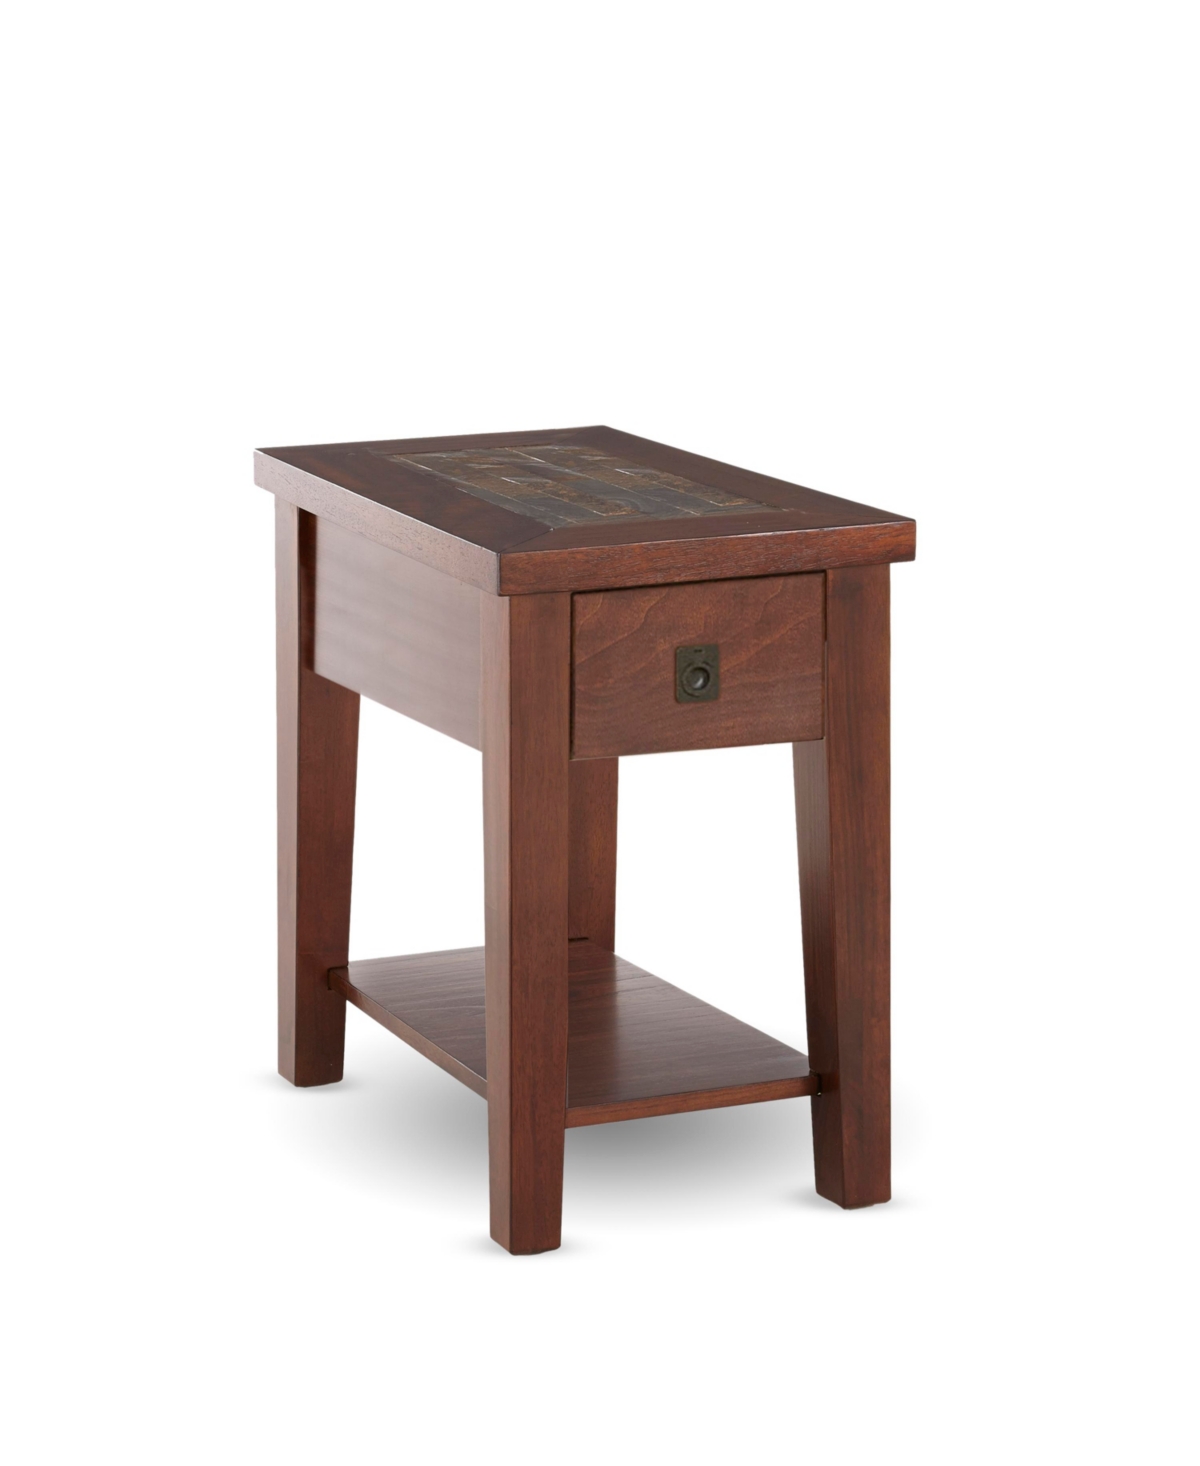 Steve Silver Davenport 13" Wide Wood Chairside End Table In Medium Brown Cherry Finish With Burnishi